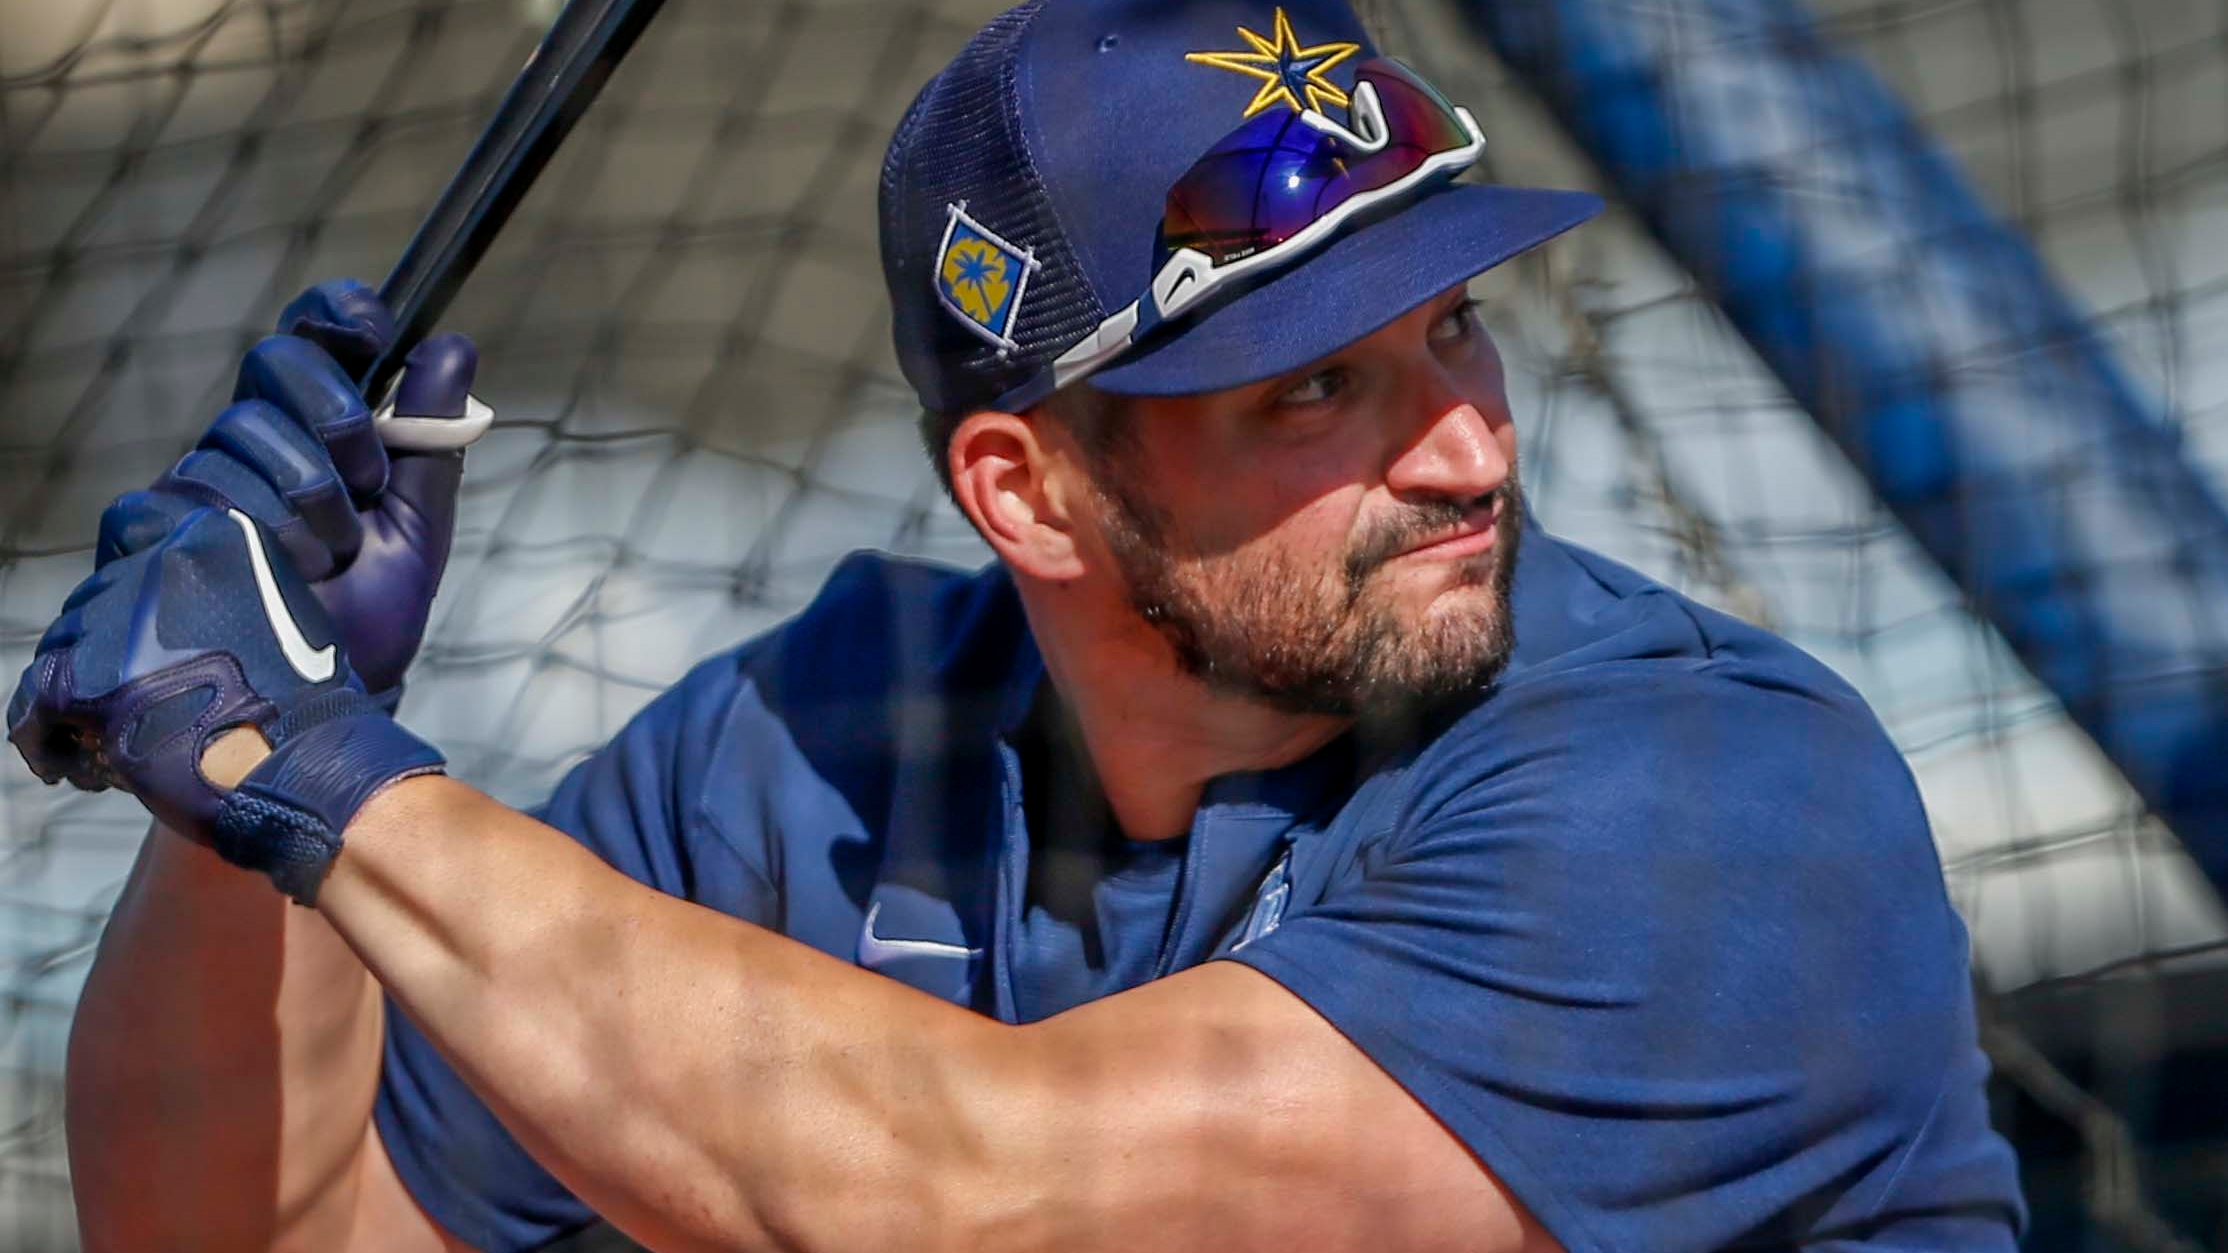 Mike Zunino Re-Signs with the Rays - Last Word On Baseball